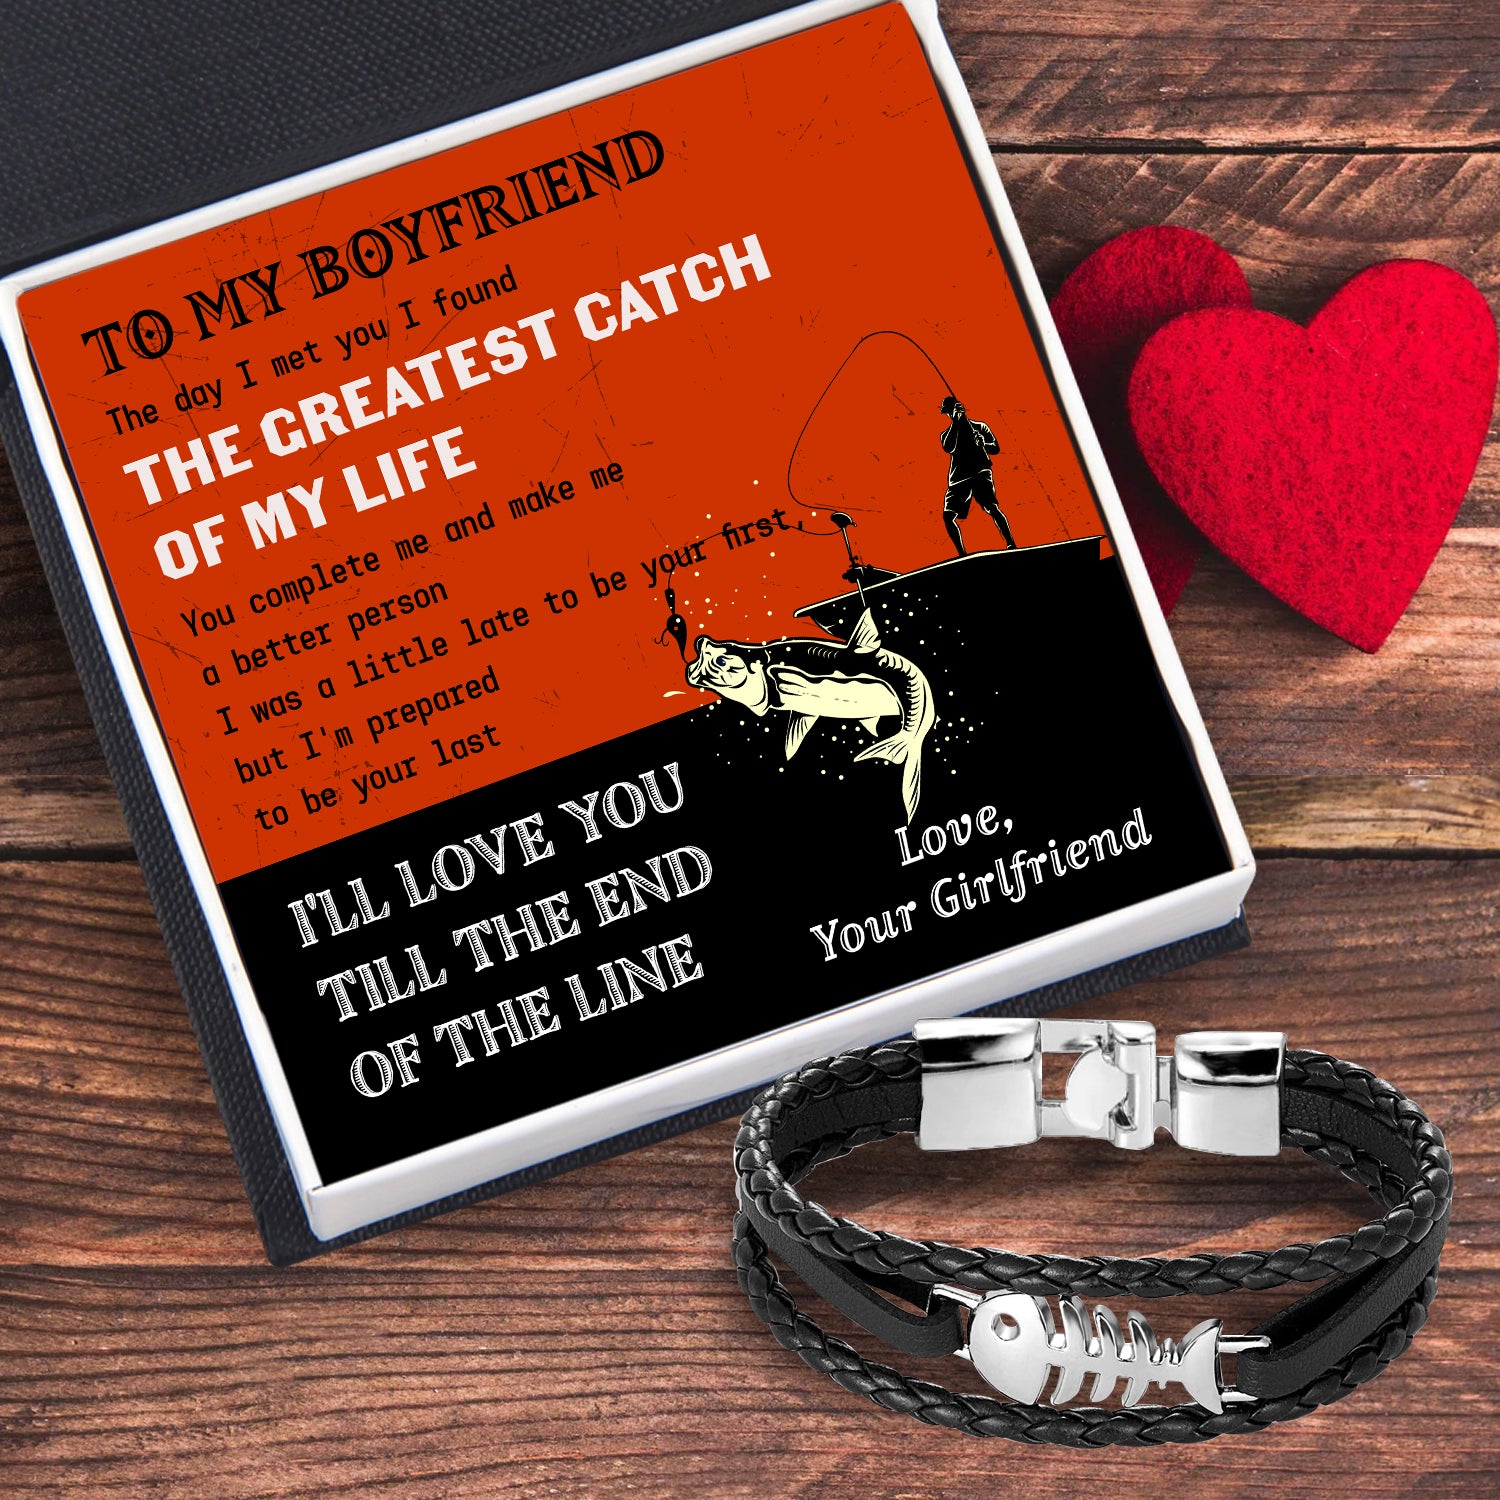 Fish Leather Bracelet - Fishing - To My Boyfriend - I'll Love You Till The End Of The Line - Ukgbzp12002